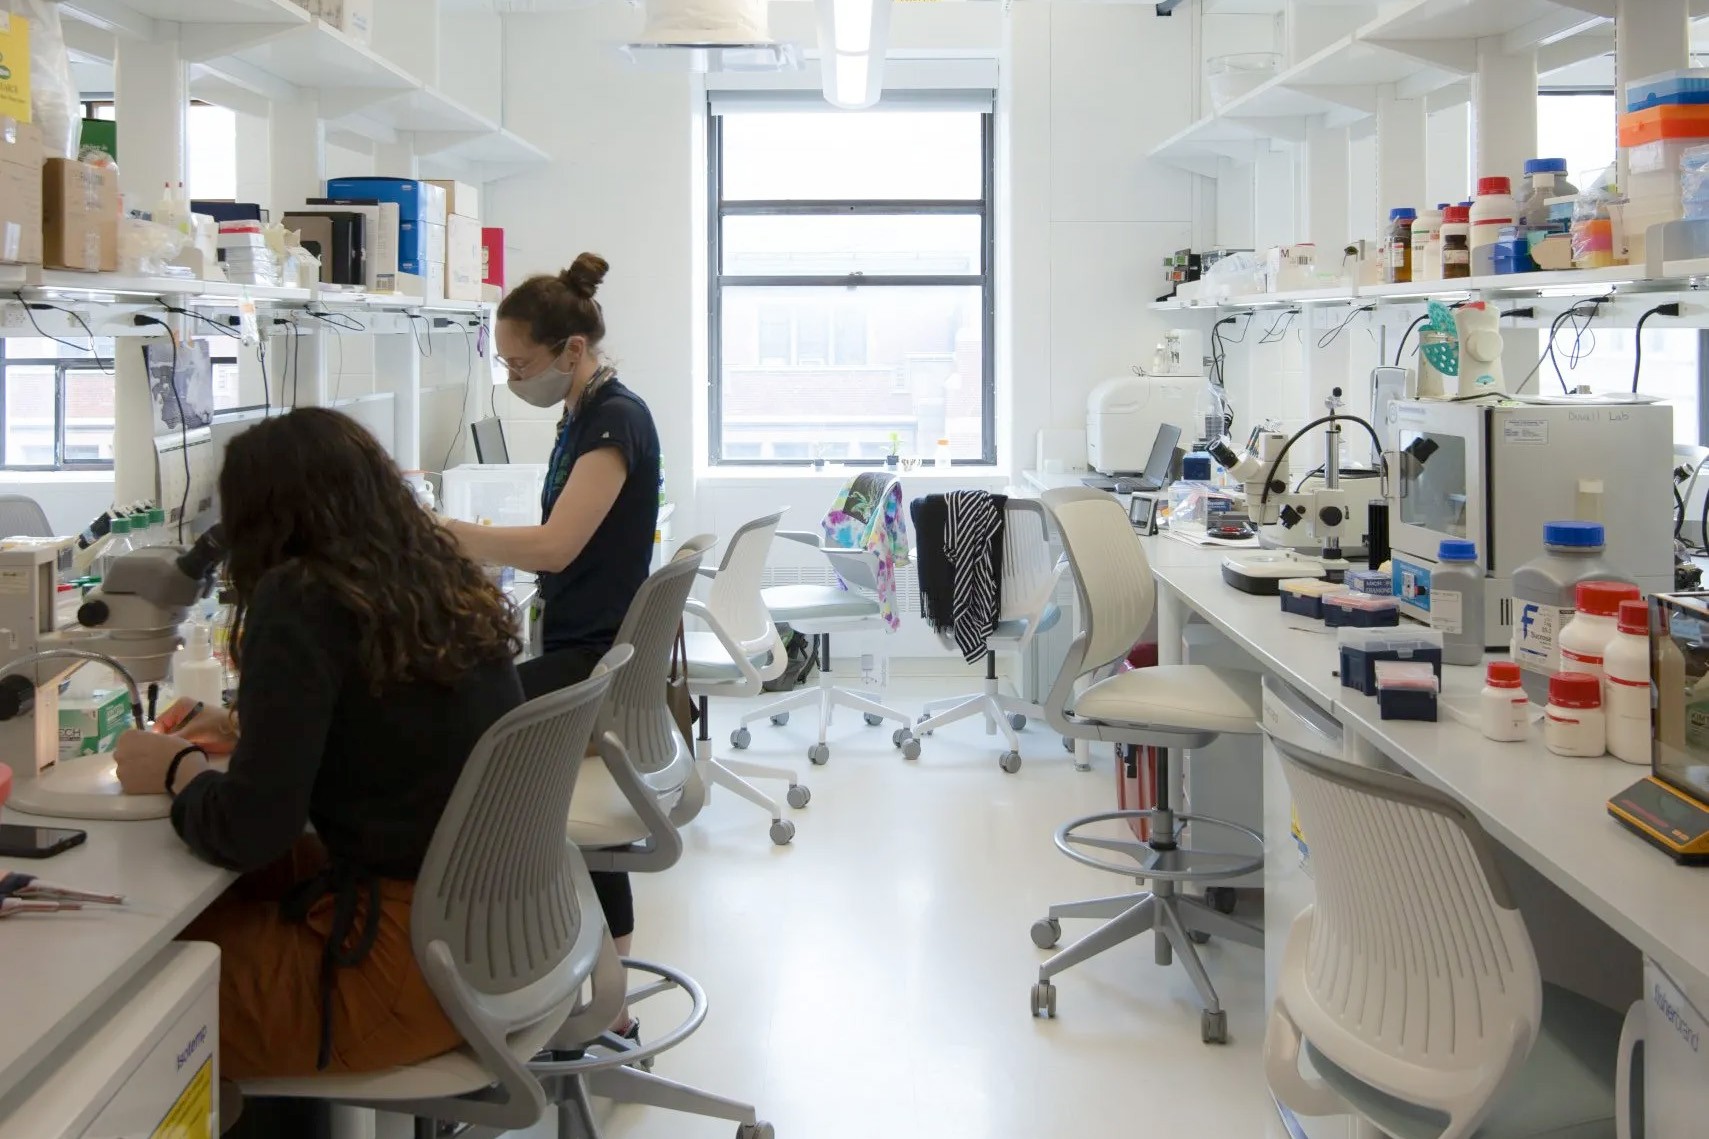 A view of a renovated lab with two students inside working on research.